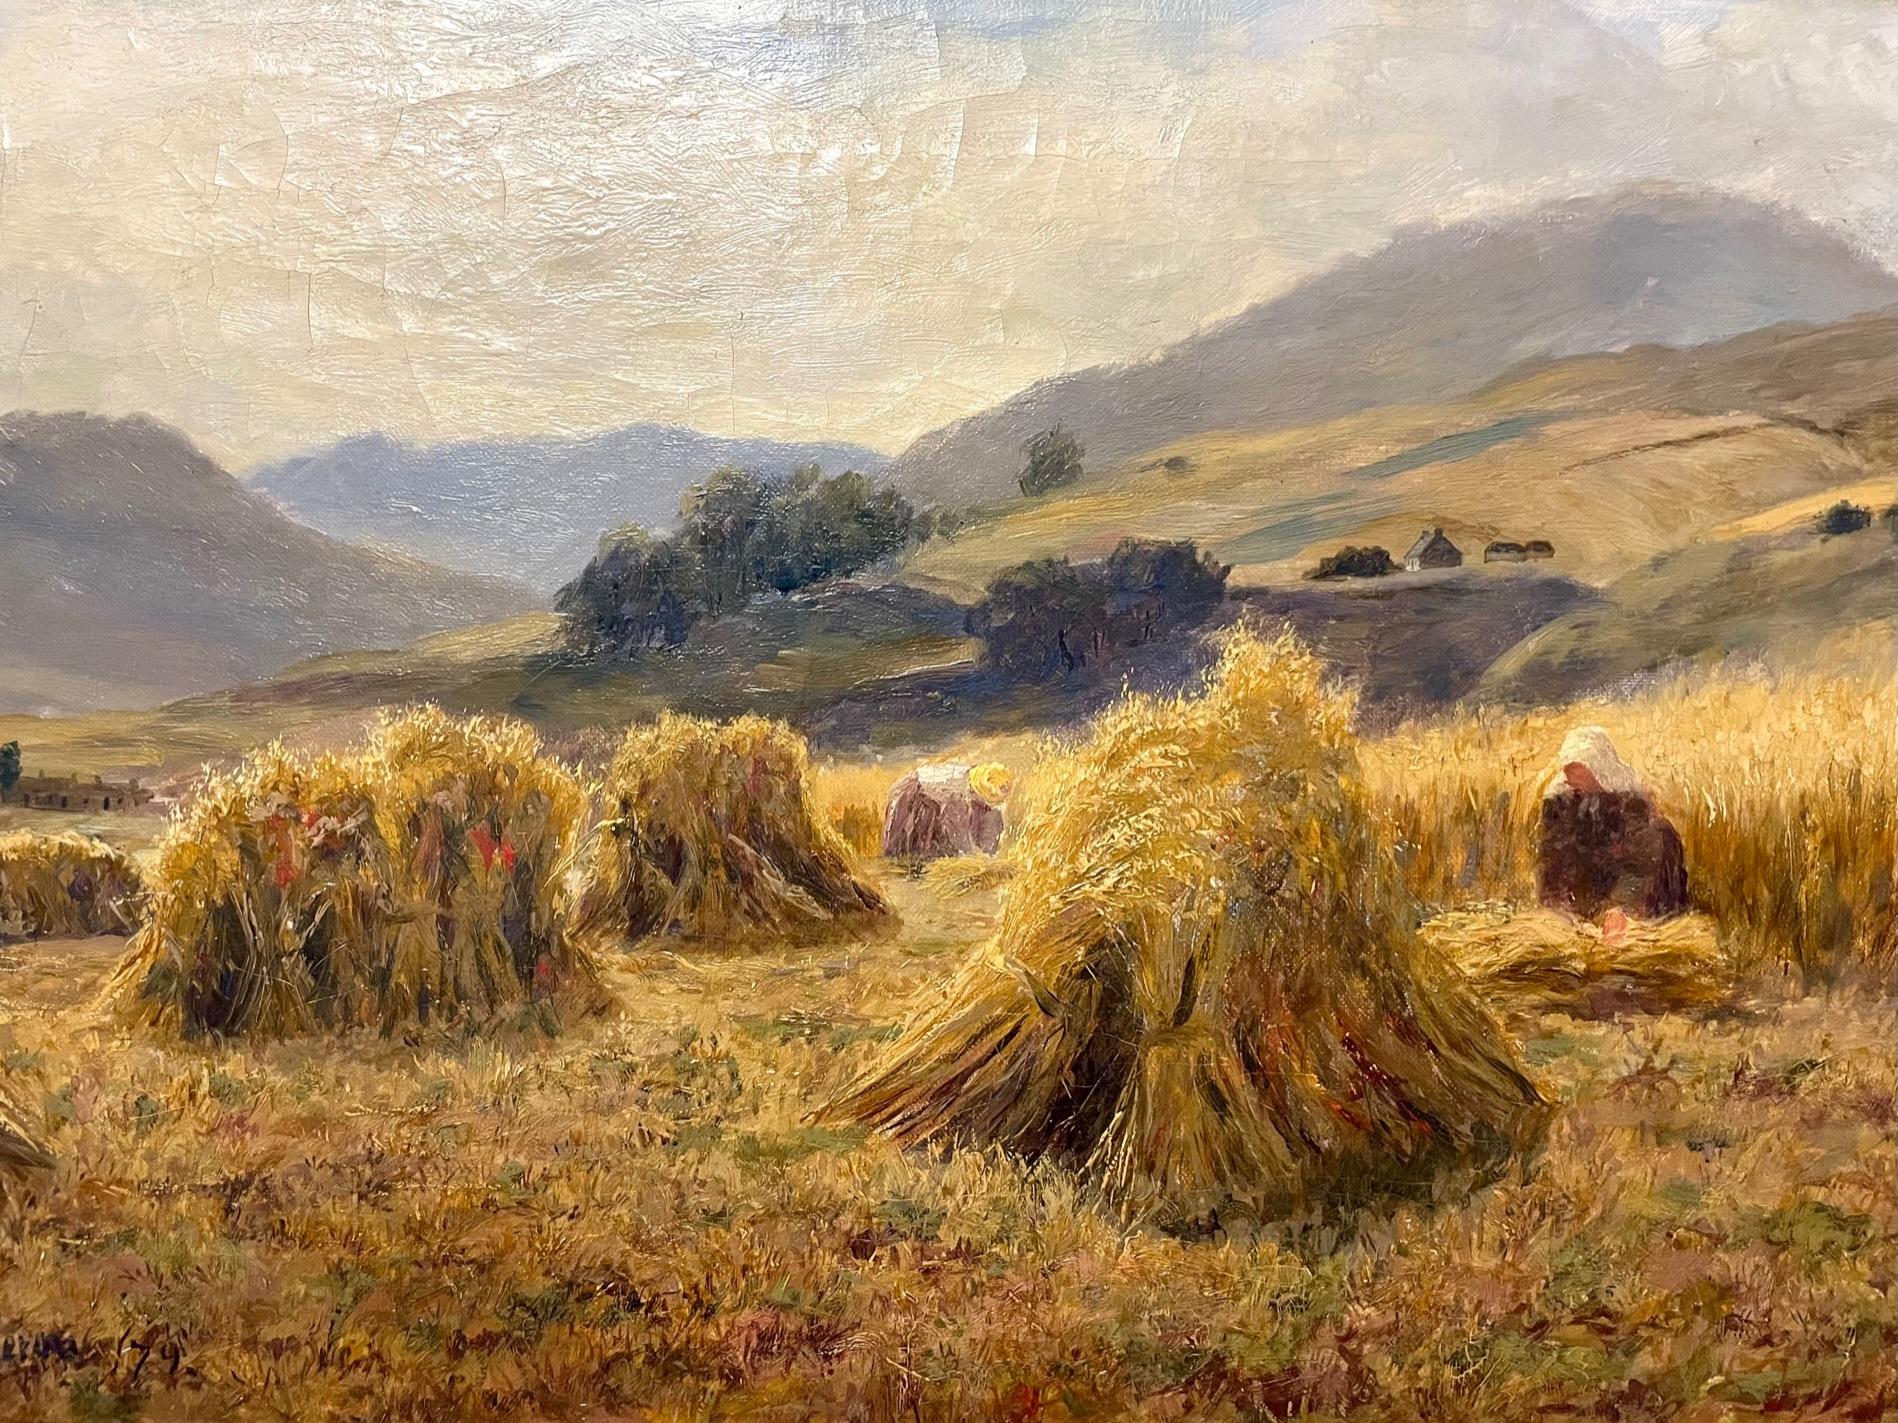 Haystacks in the Highlands - Brown Landscape Painting by Duncan Cameron